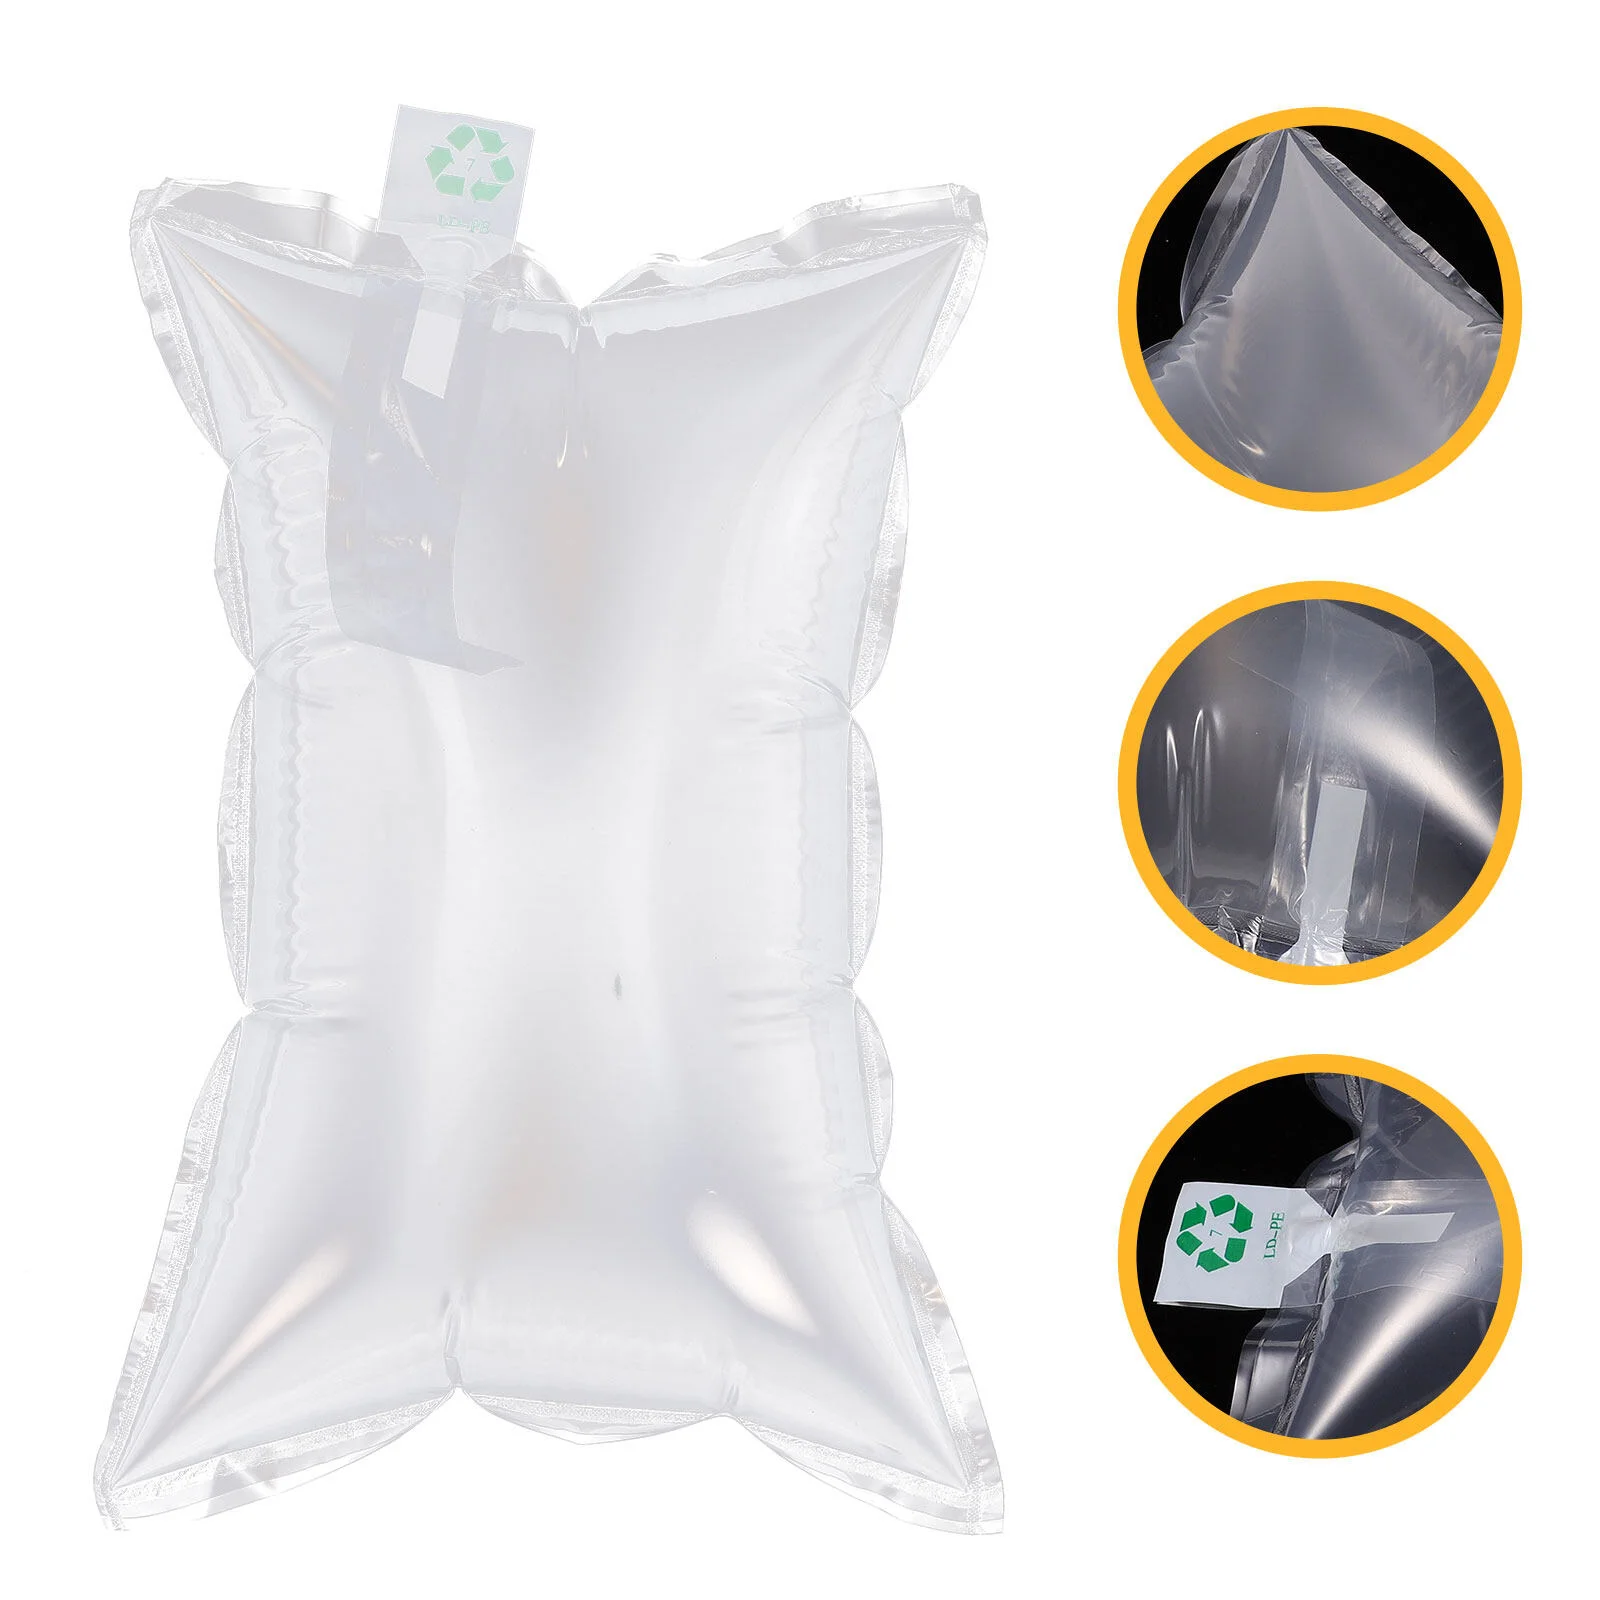 

30PCS Plastic Envelope Air Pillows Air Bubble Bags Cushion Filler Bag Roll Packing Film for Shipping and Packaging